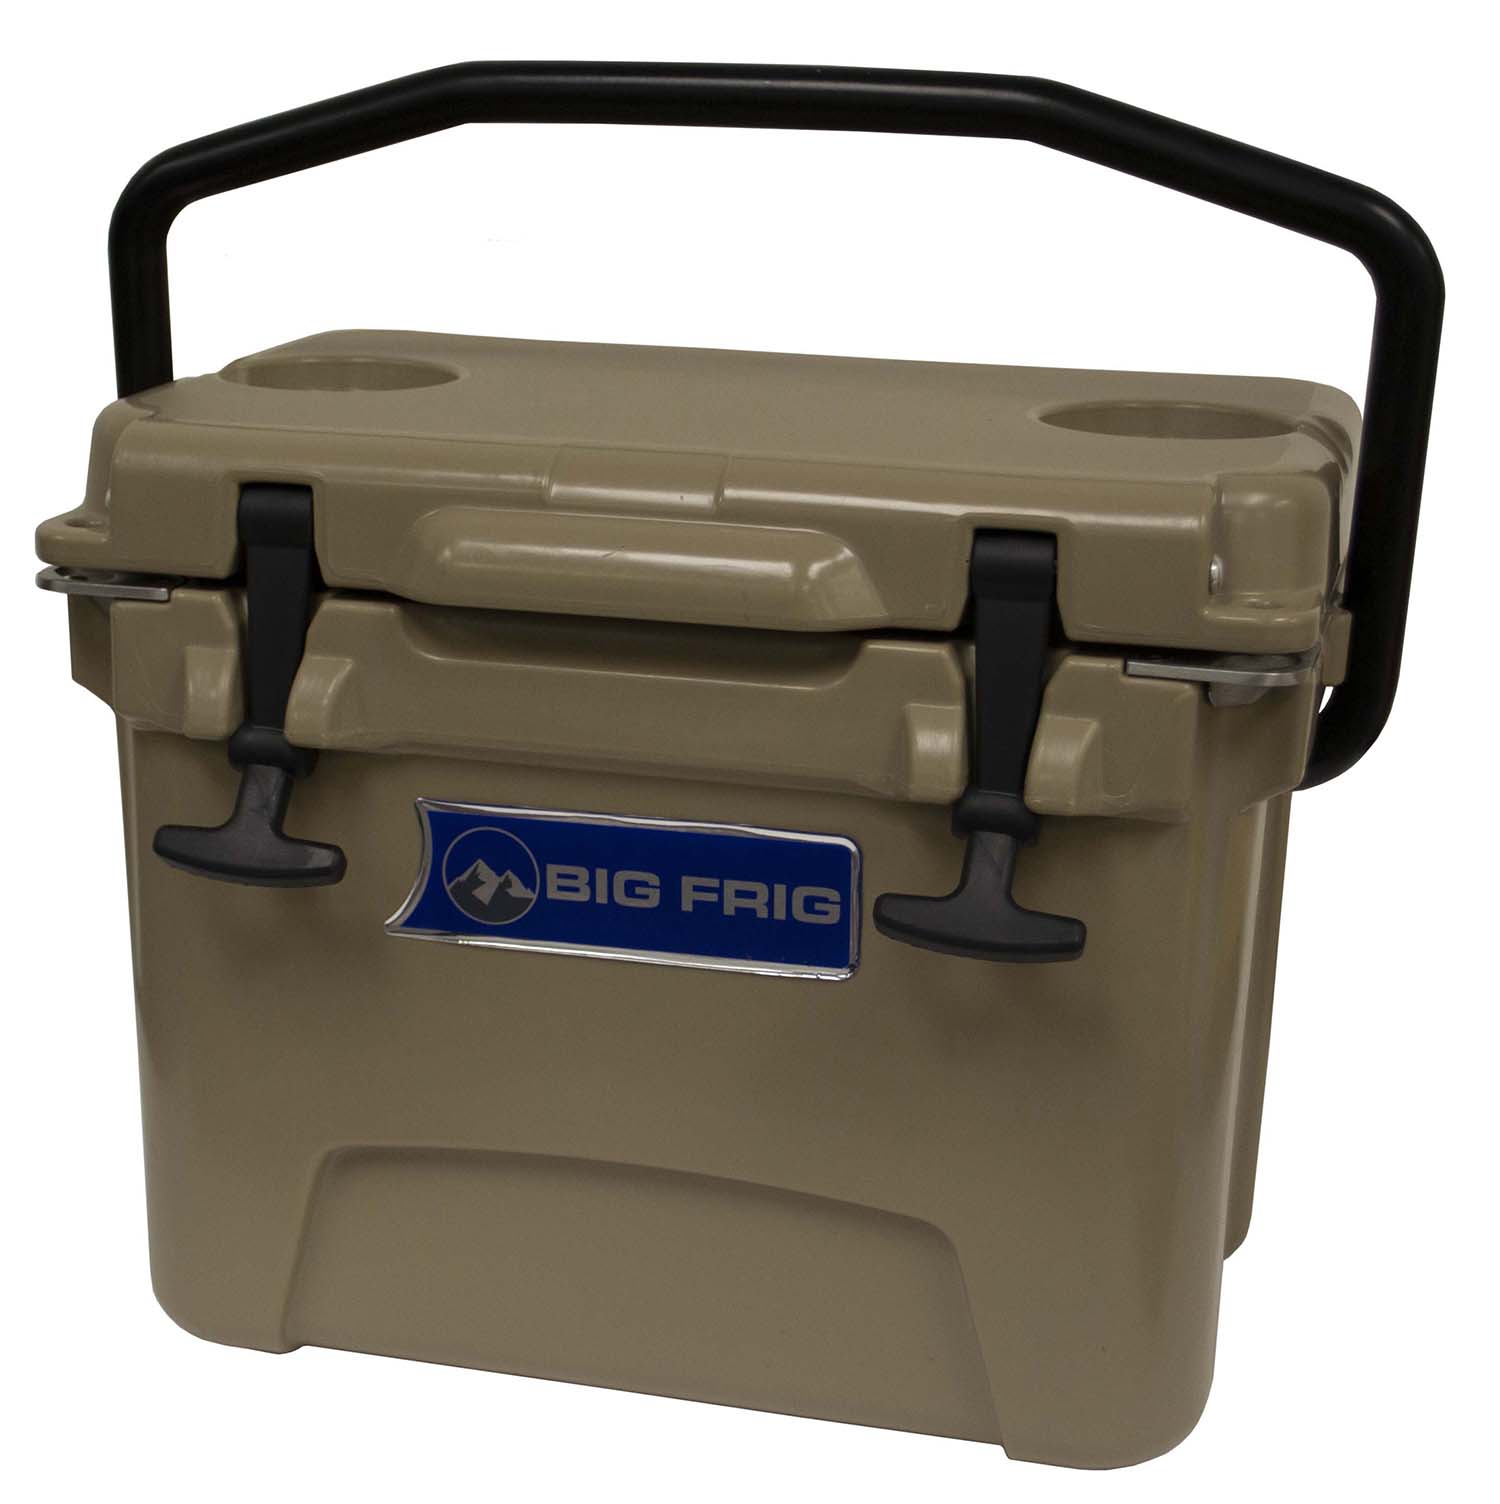 BIG FRIG 10-QUART DENALI COOLER IS PERFECT FOR YOUR LUNCH OR PICNIC